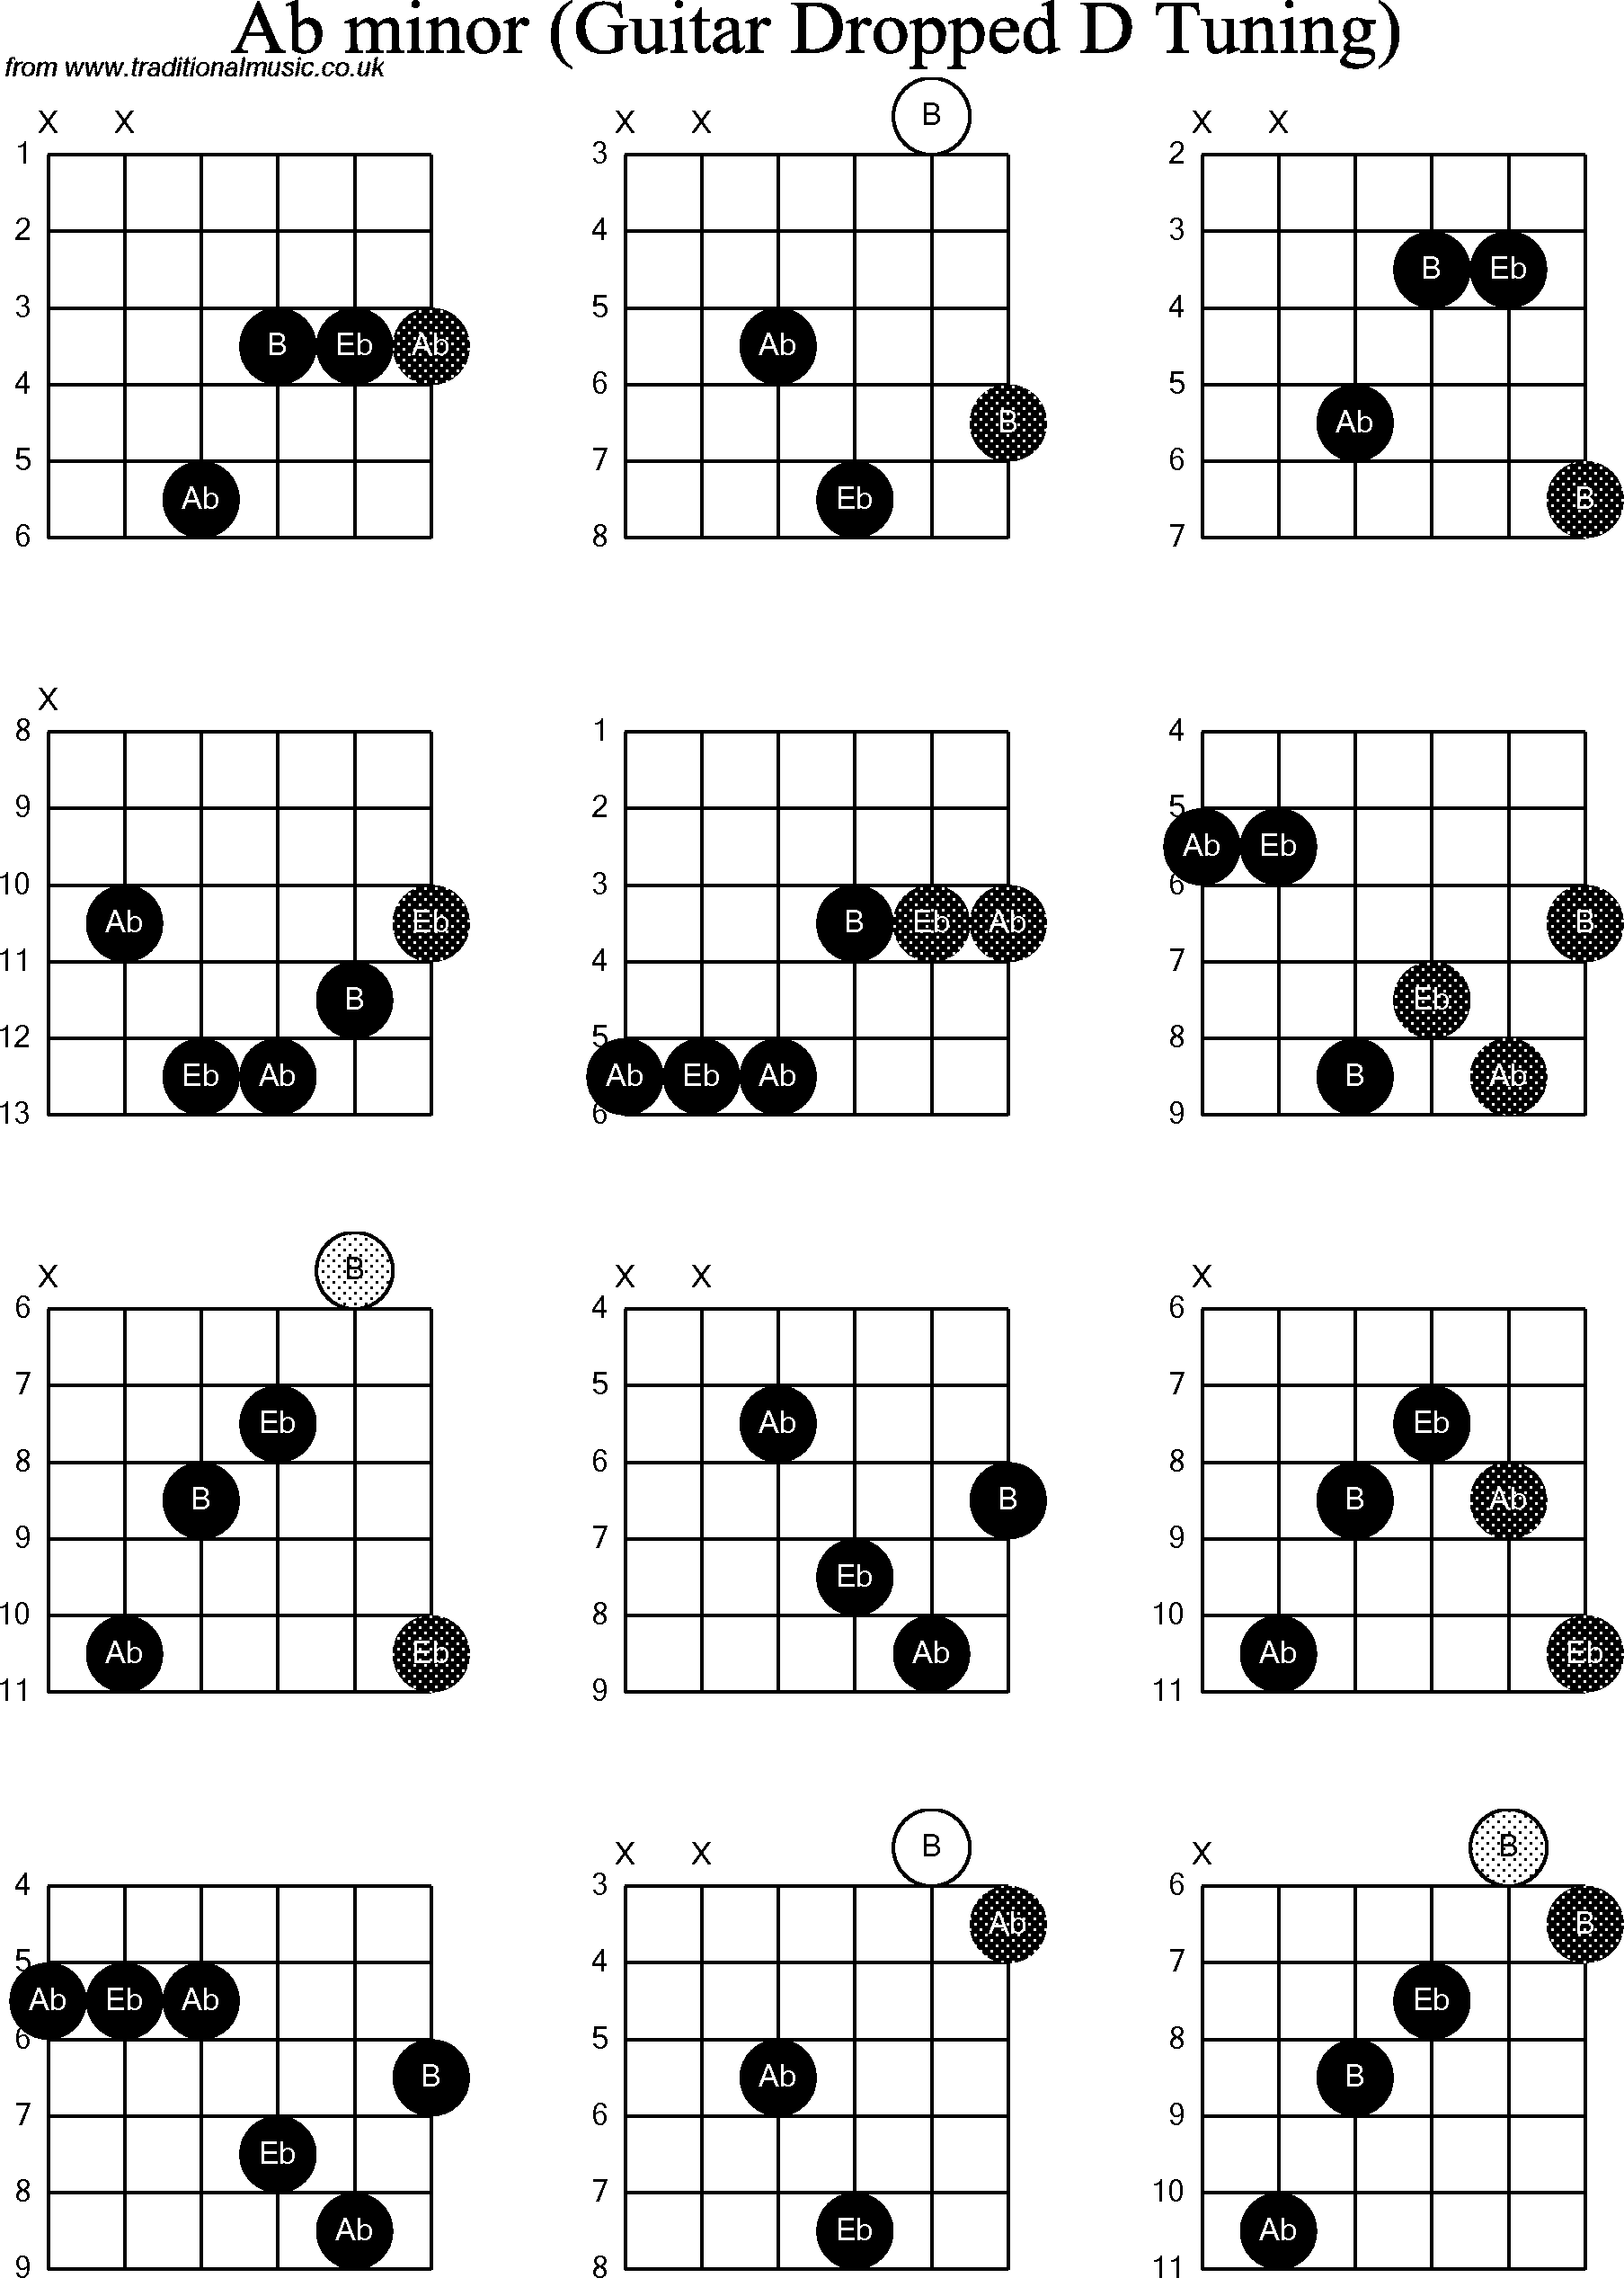 Chord diagrams for dropped D Guitar(DADGBE), Ab Minor